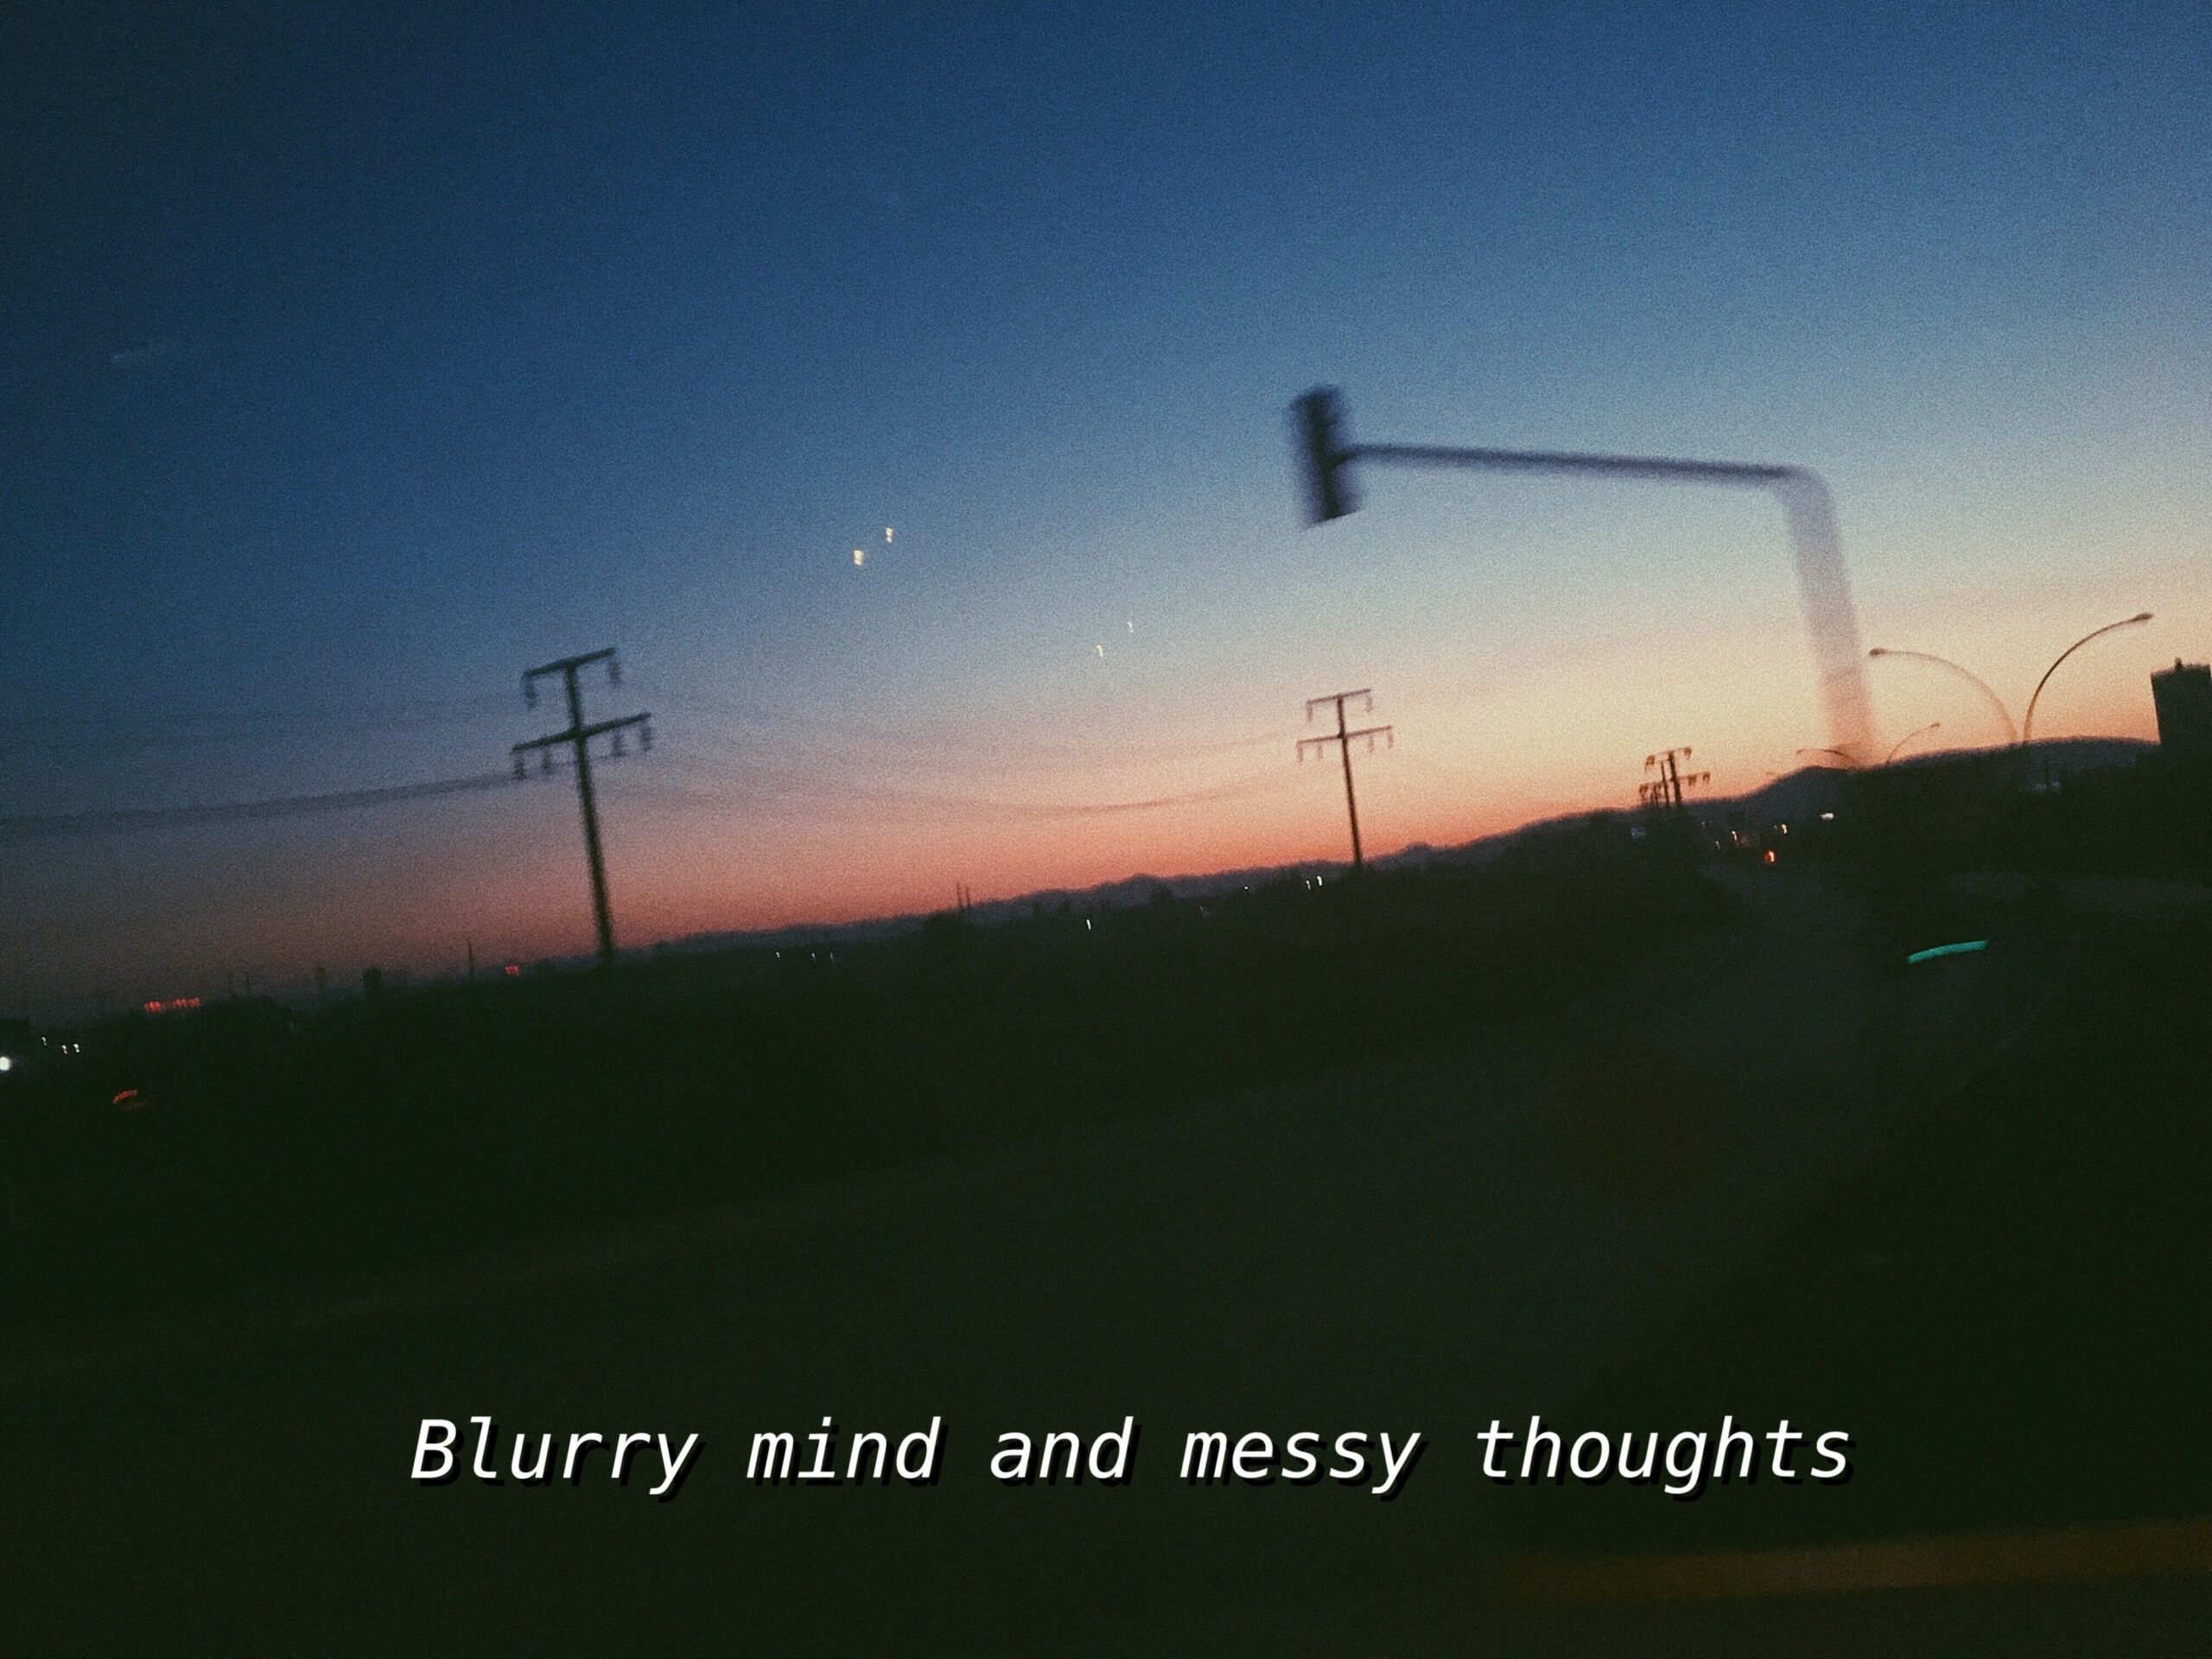 Blurry mind and messy thoughts